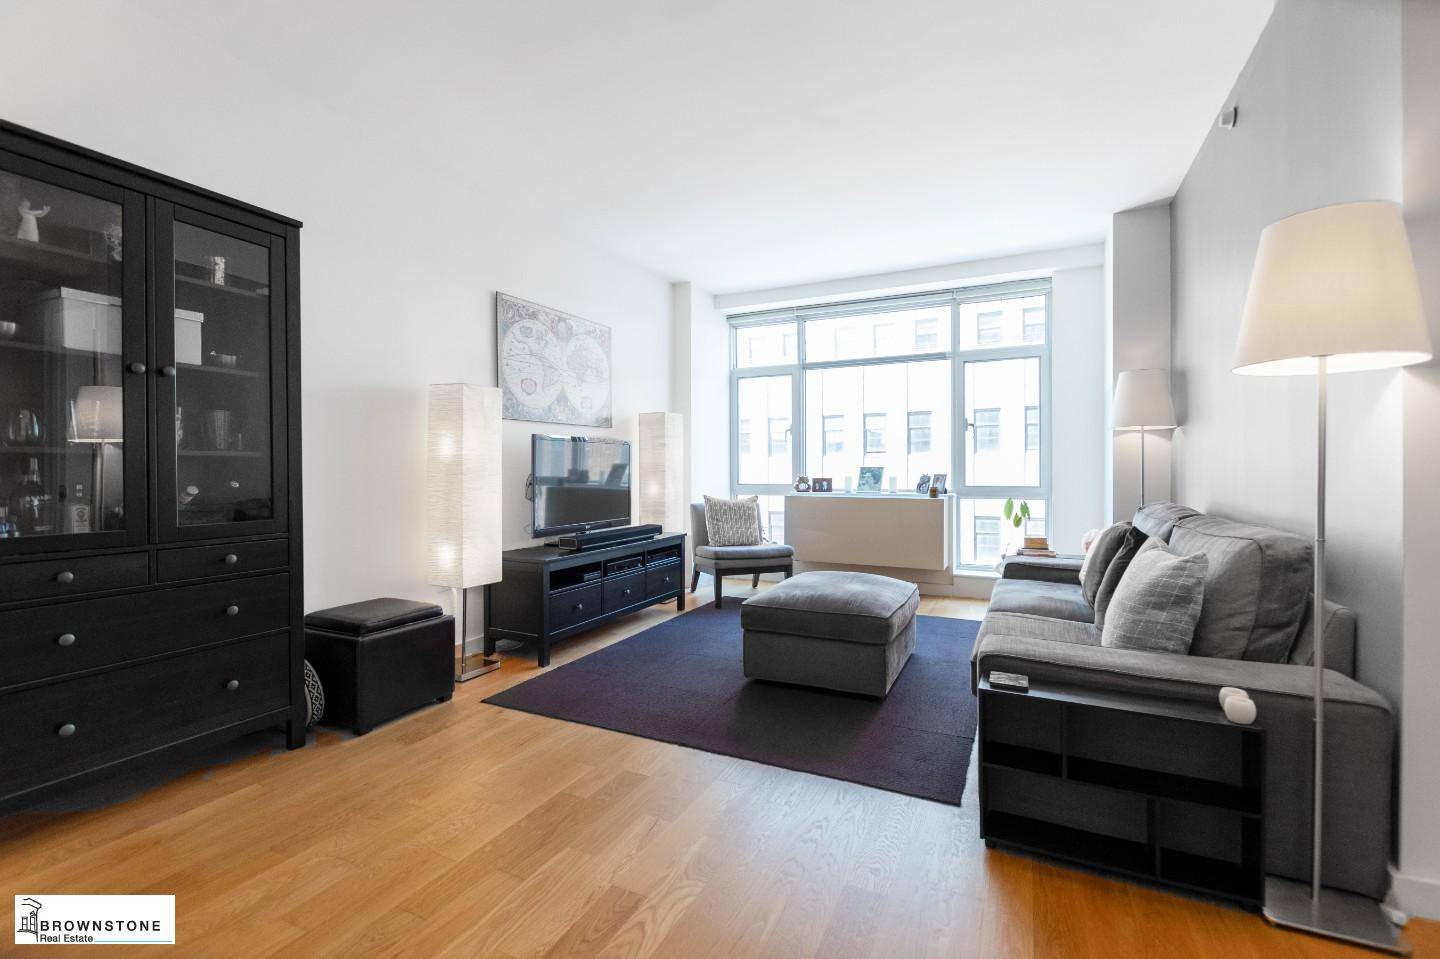 Come home to a luxury condominium in the heart of Downtown Brooklyn with 10F at 189 Schermerhorn Street.